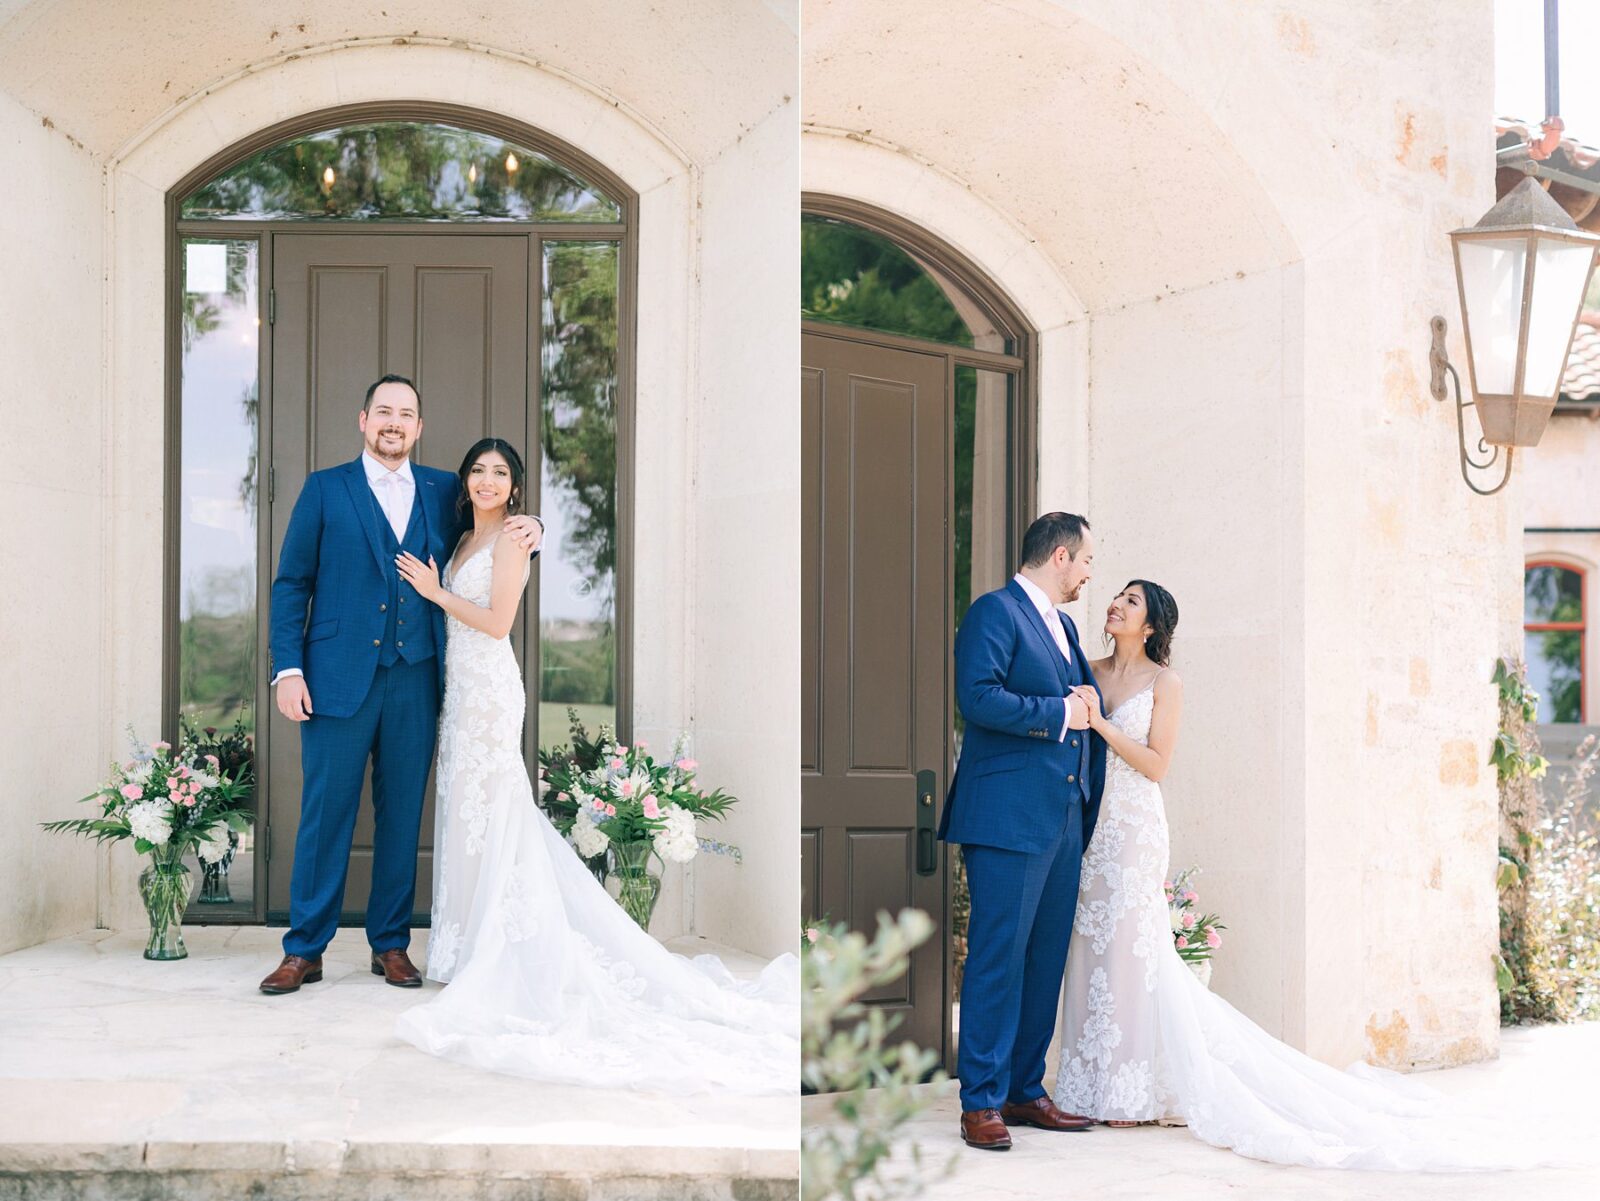 bride and groom portraits, blue groom suit, groom with pink tie, garey house wedding, reception at garey house, catholic wedding photography tips, photos by Tara Lyons Photography, Austin texas wedding photographer, garey house wedding